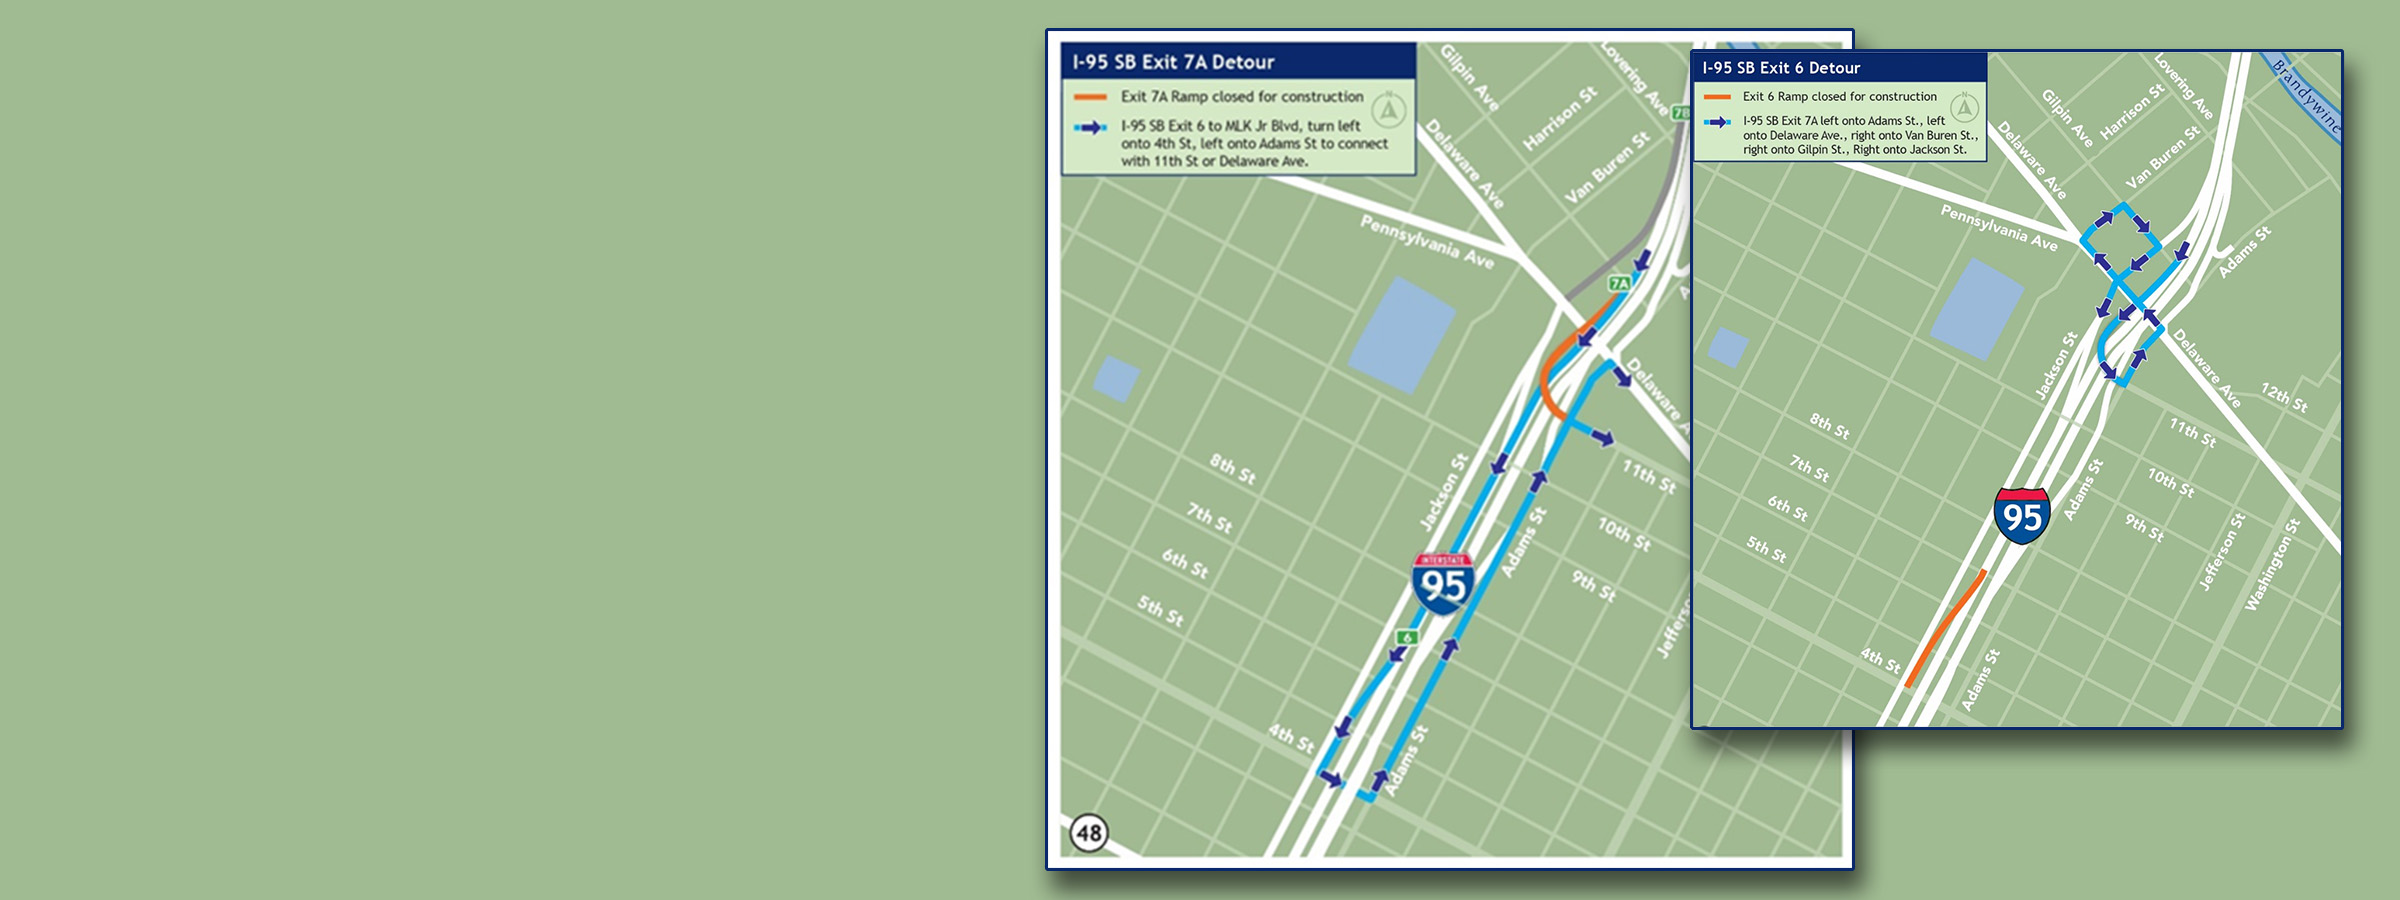 I-95 Southbound Overnight Ramp Closures - UPDATE